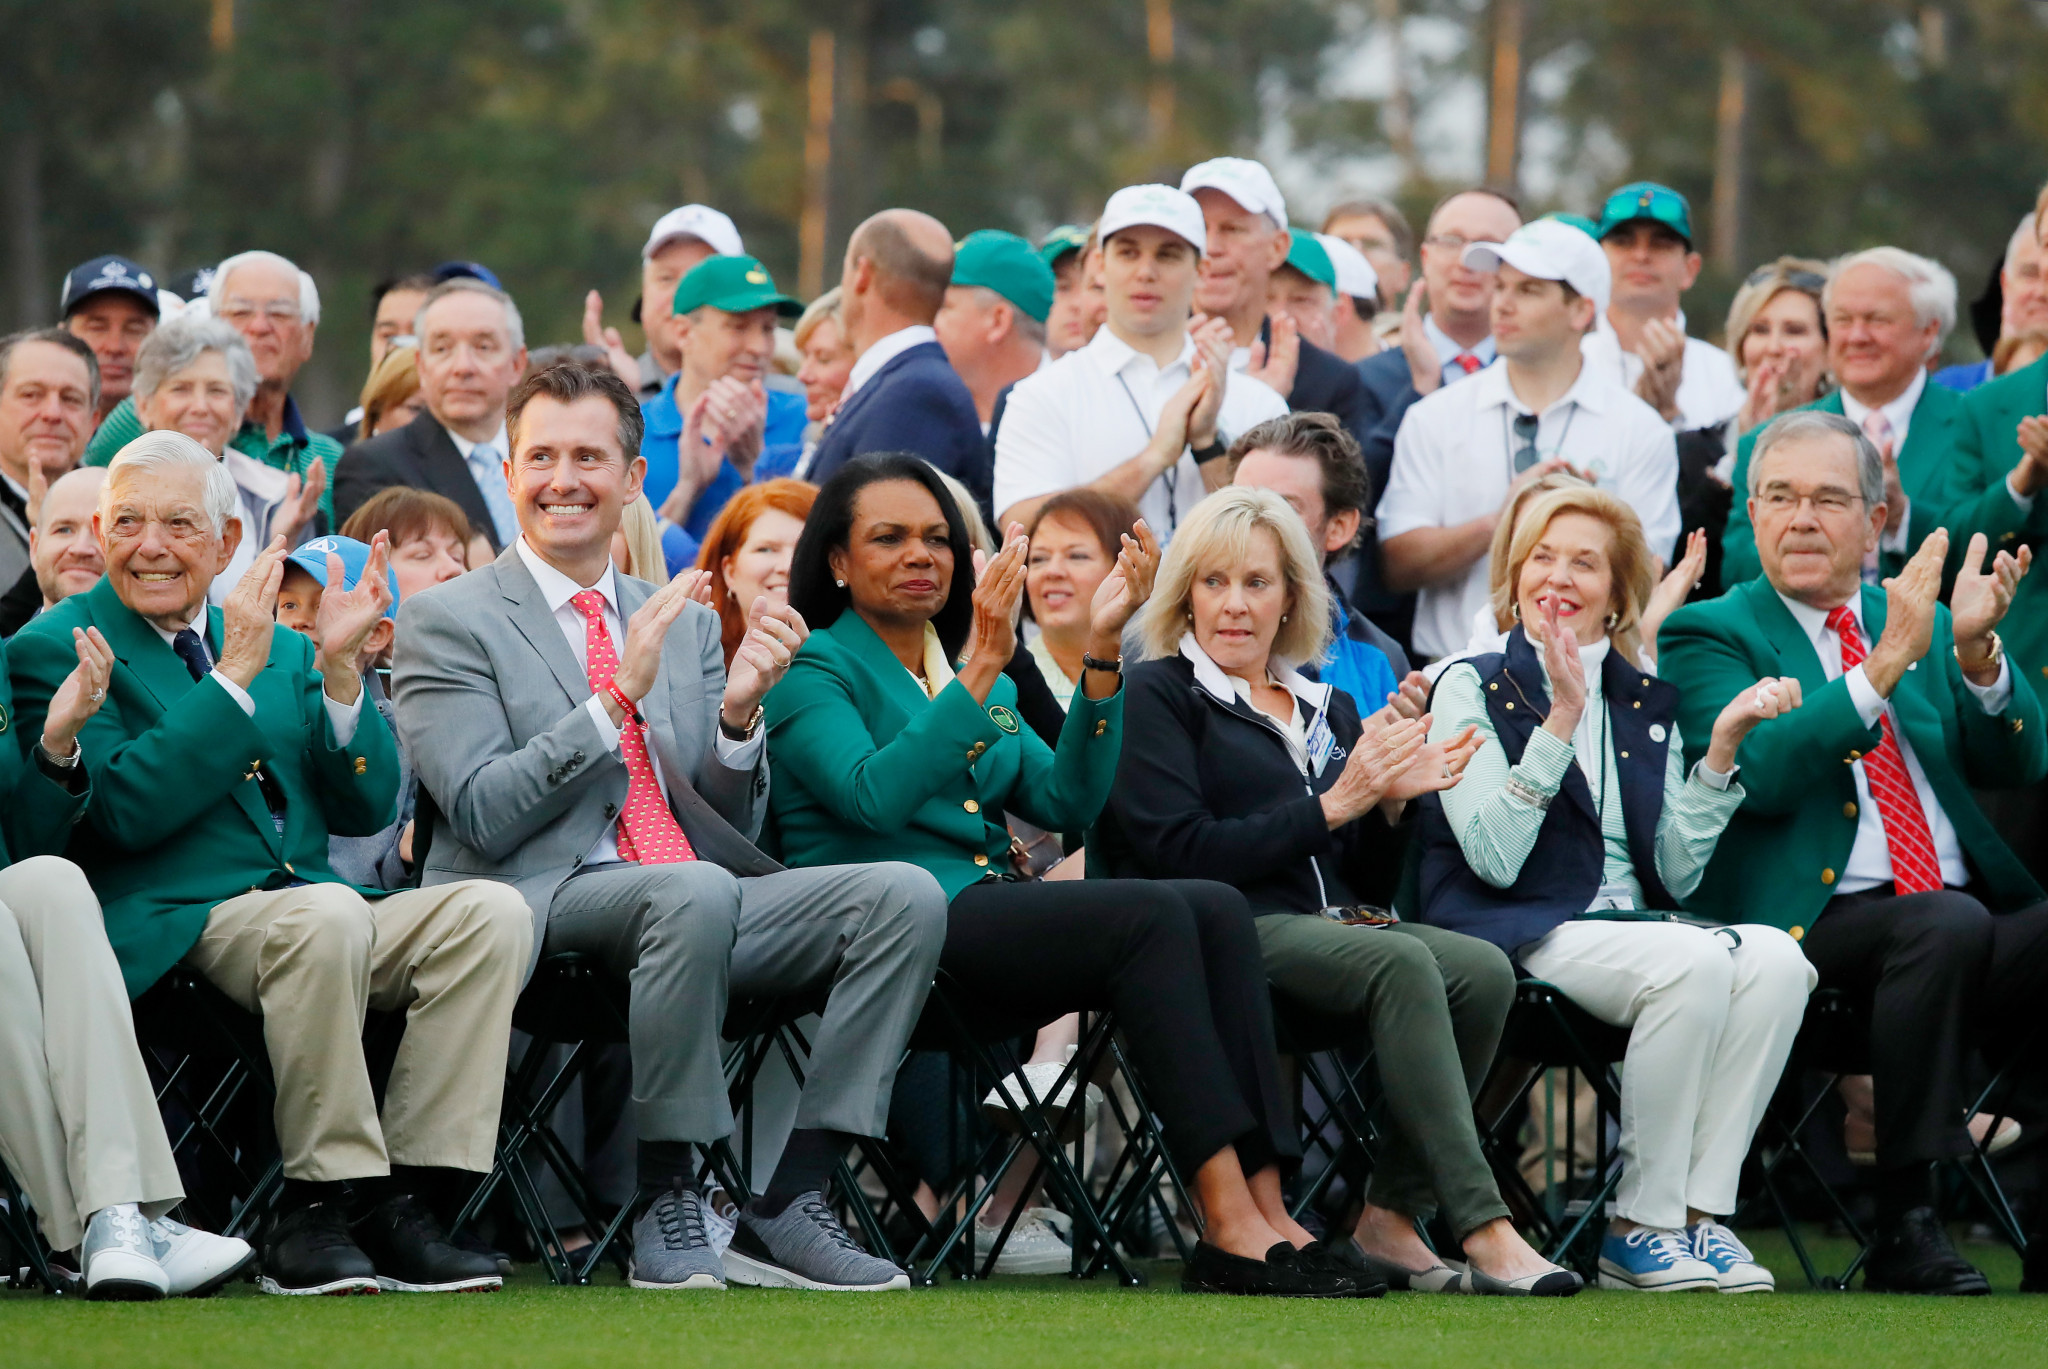 History made as women play first competitive round at Augusta National